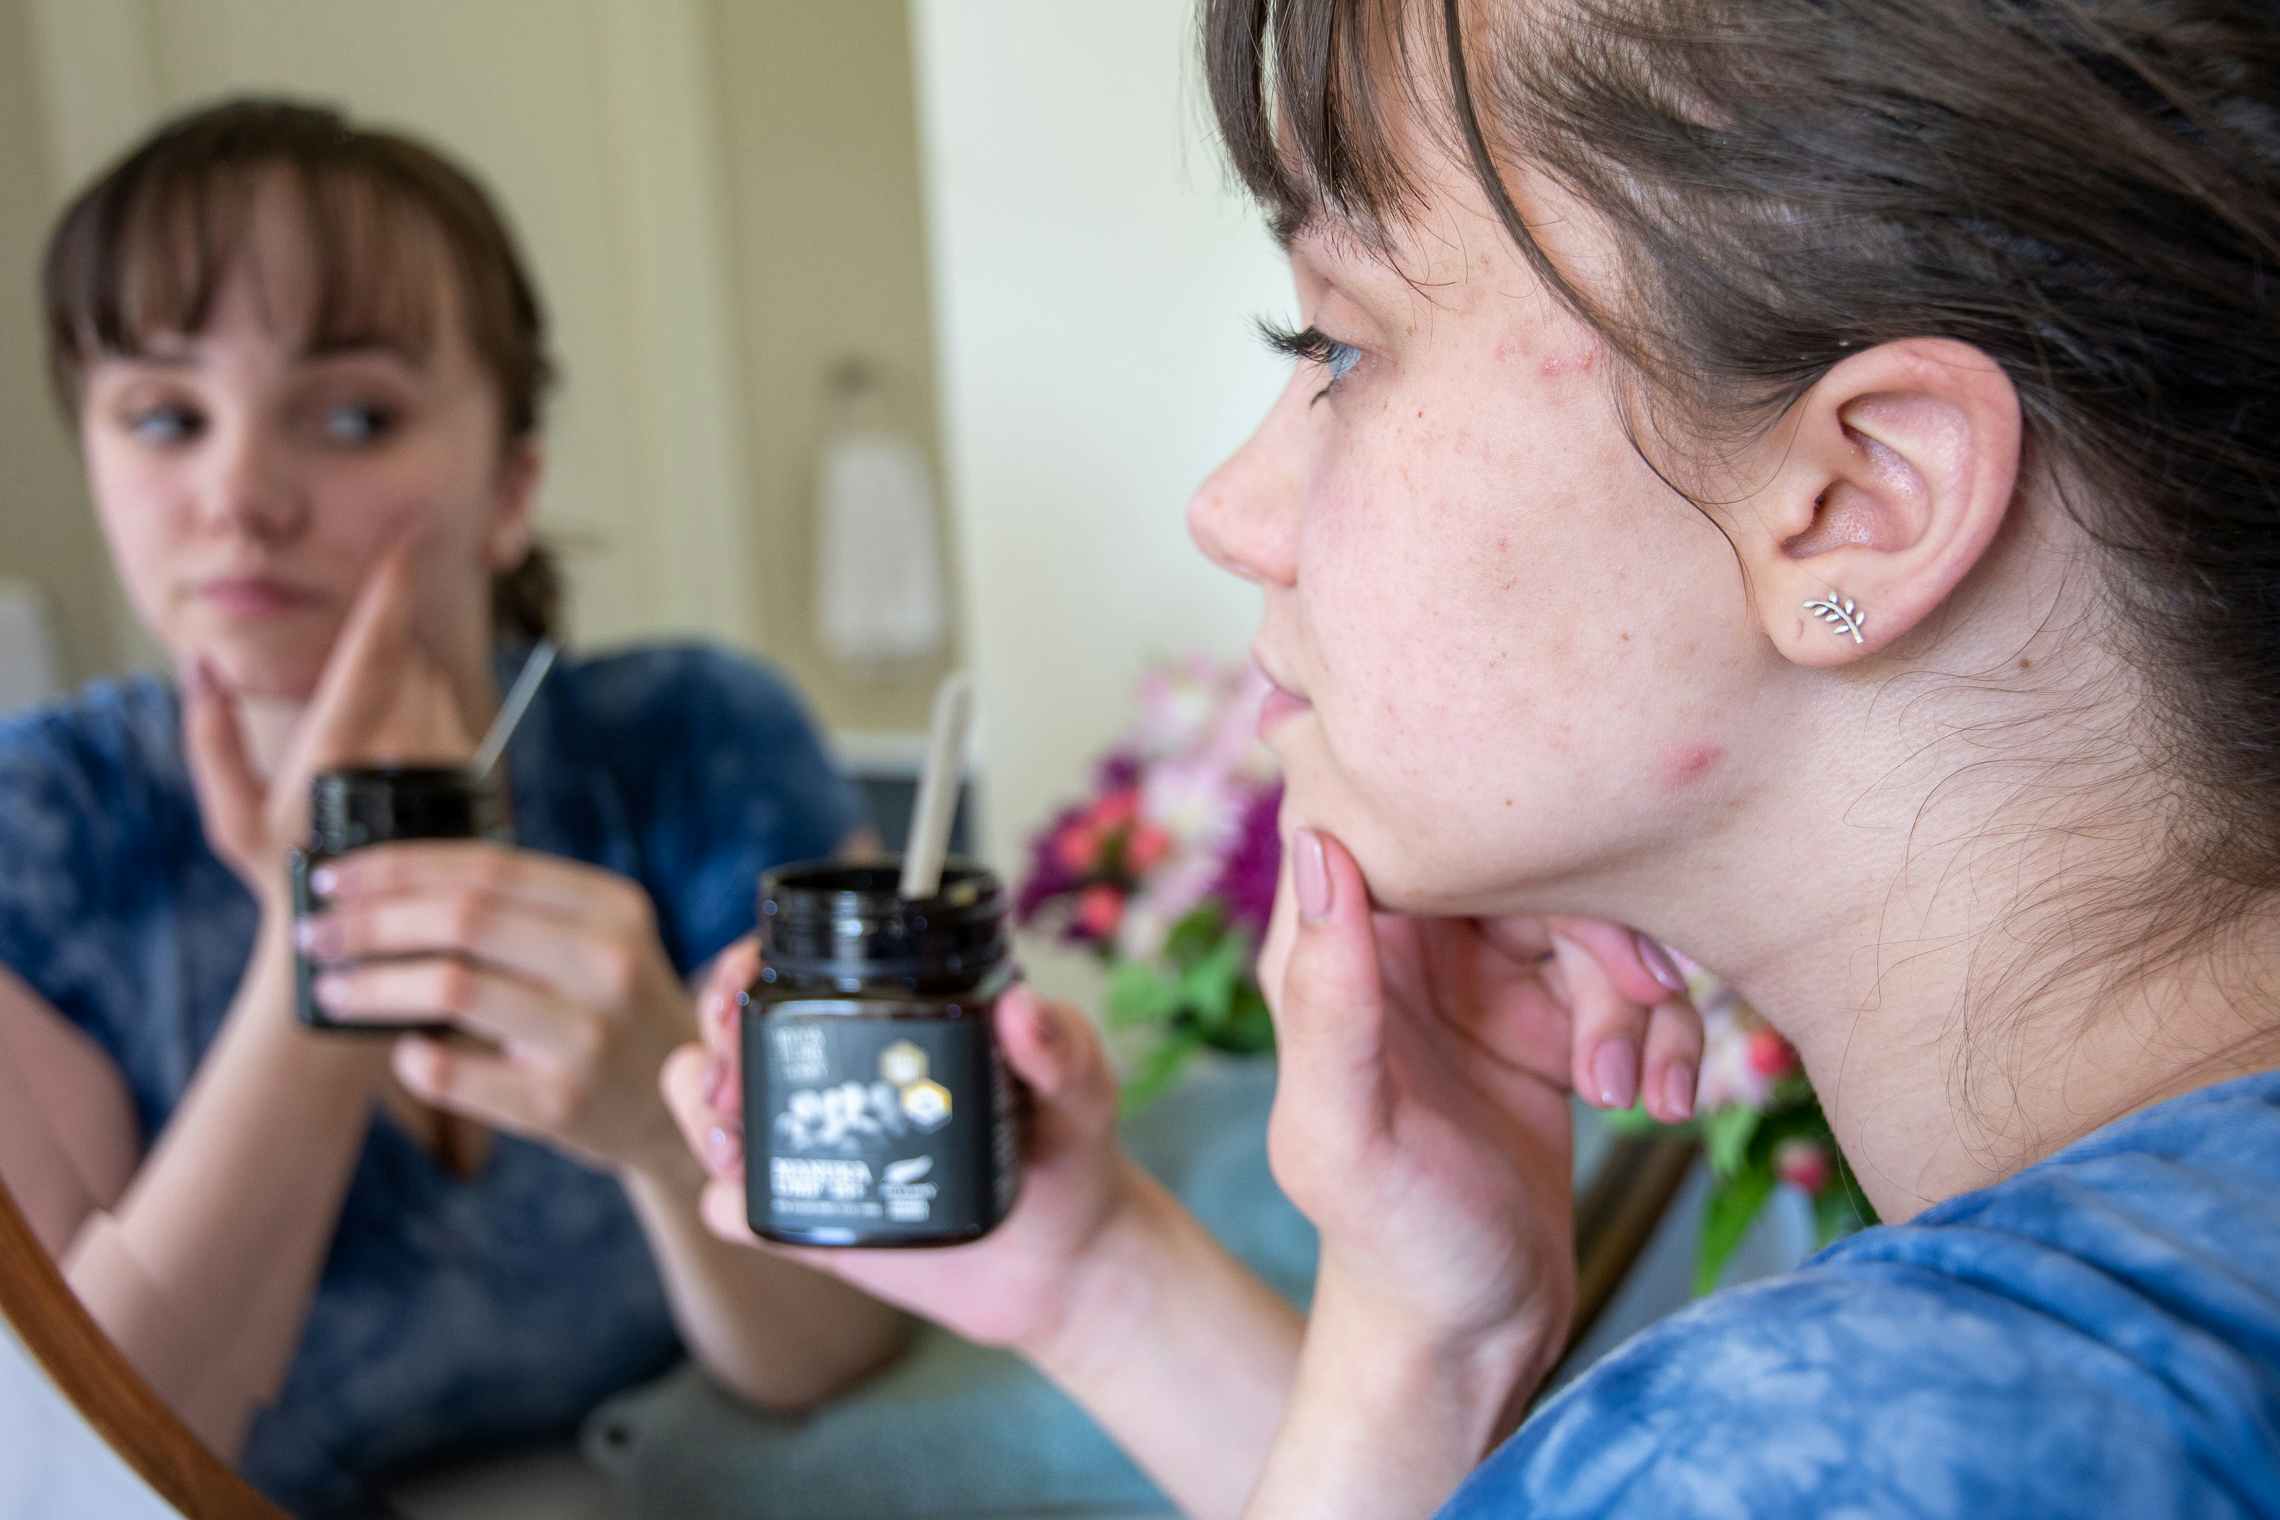 A woman with mild acne looking in a mirror, holding a jar of Manuka Honey.